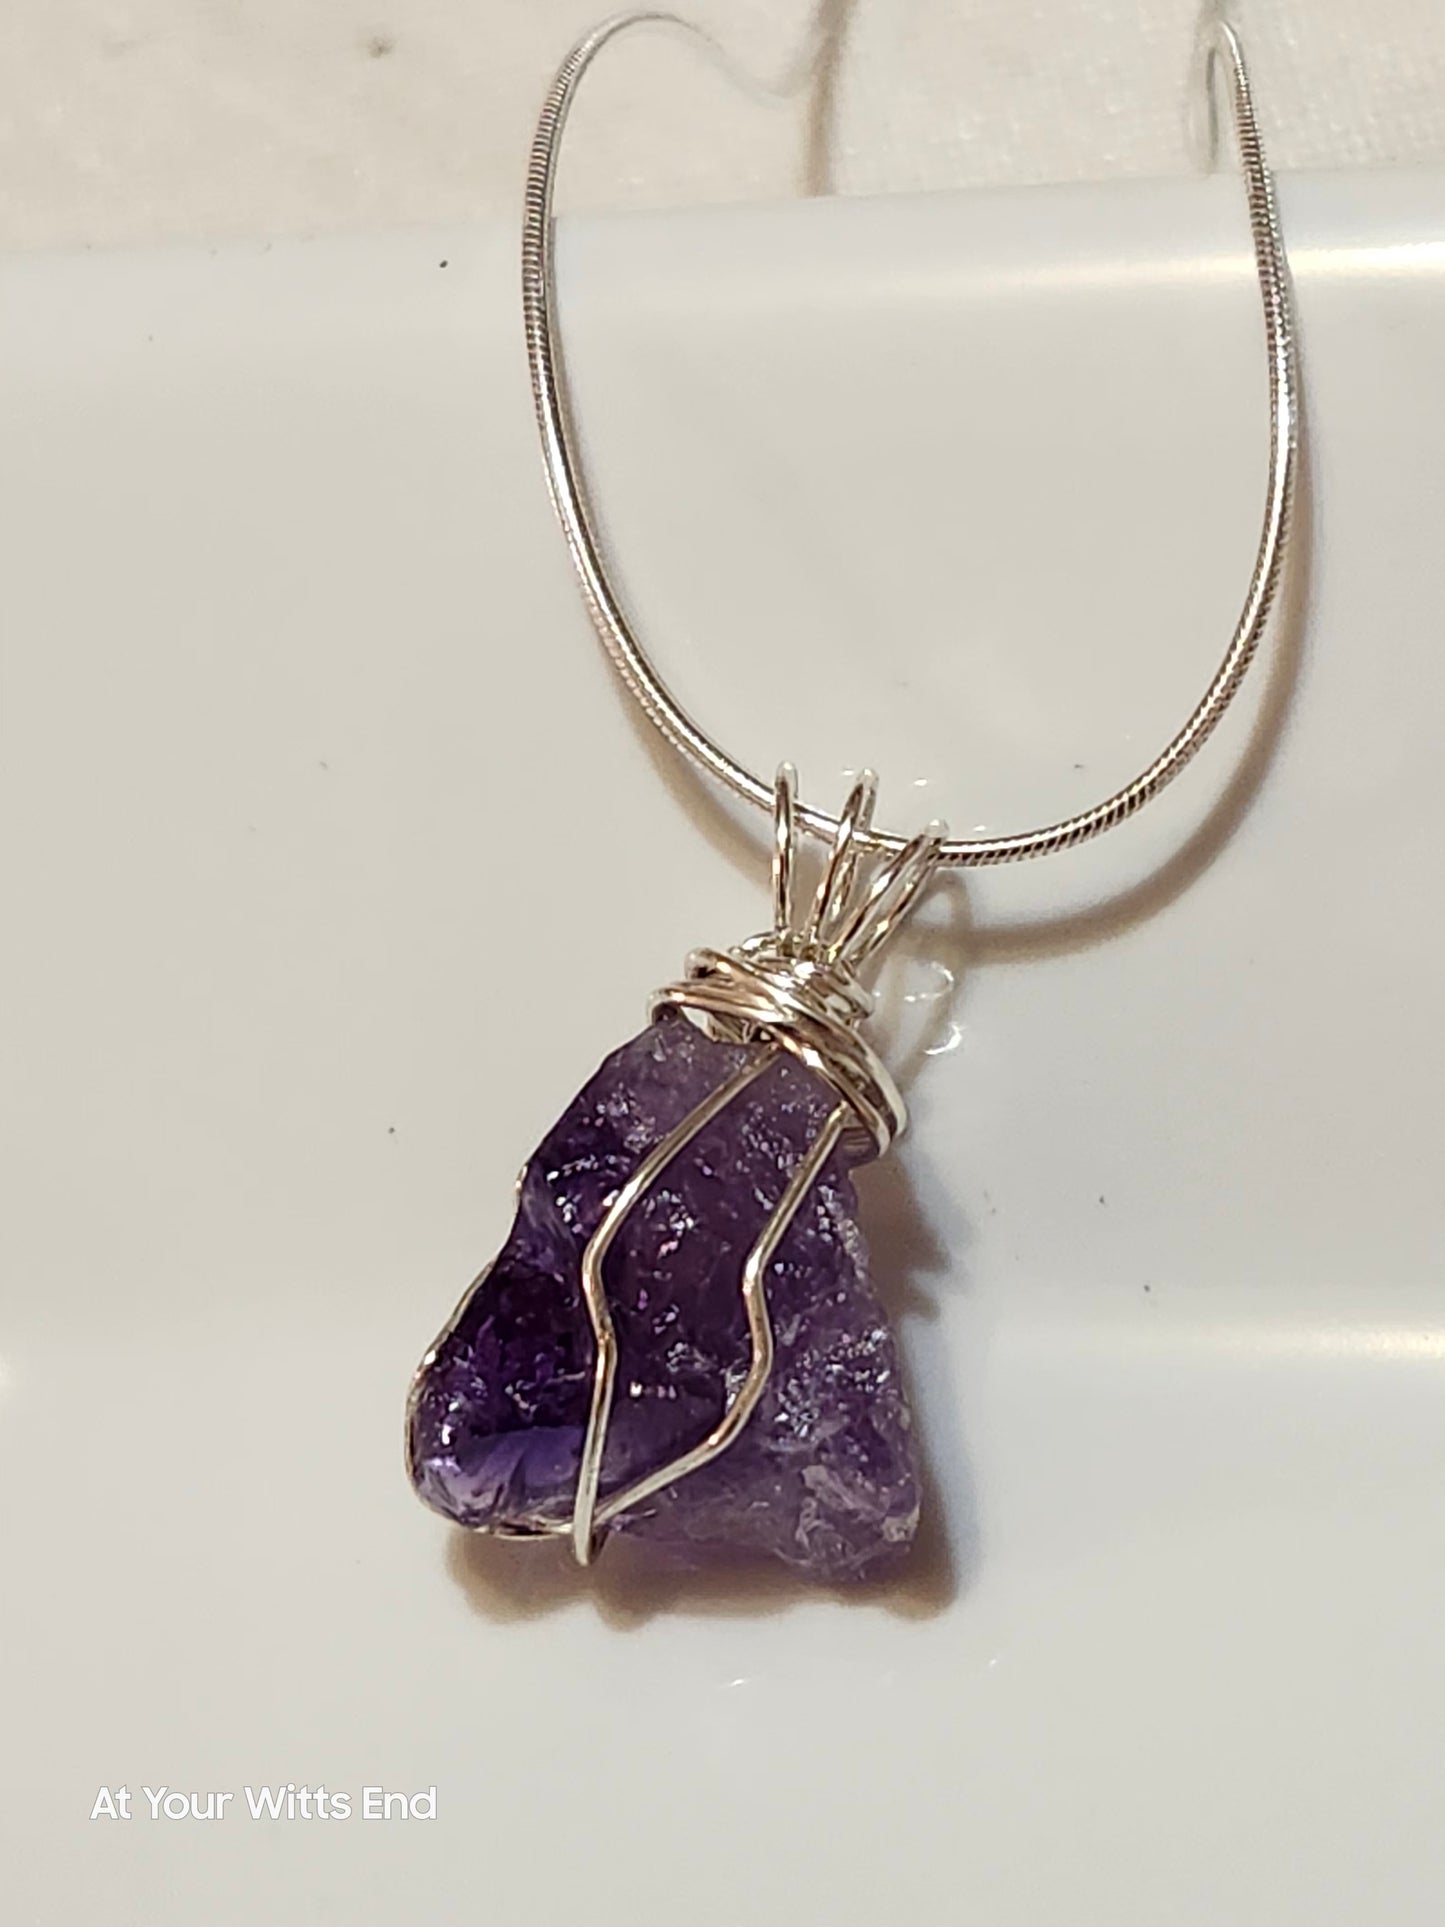 Genuine Amethyst Stone Necklace, sterling silver chain 18"